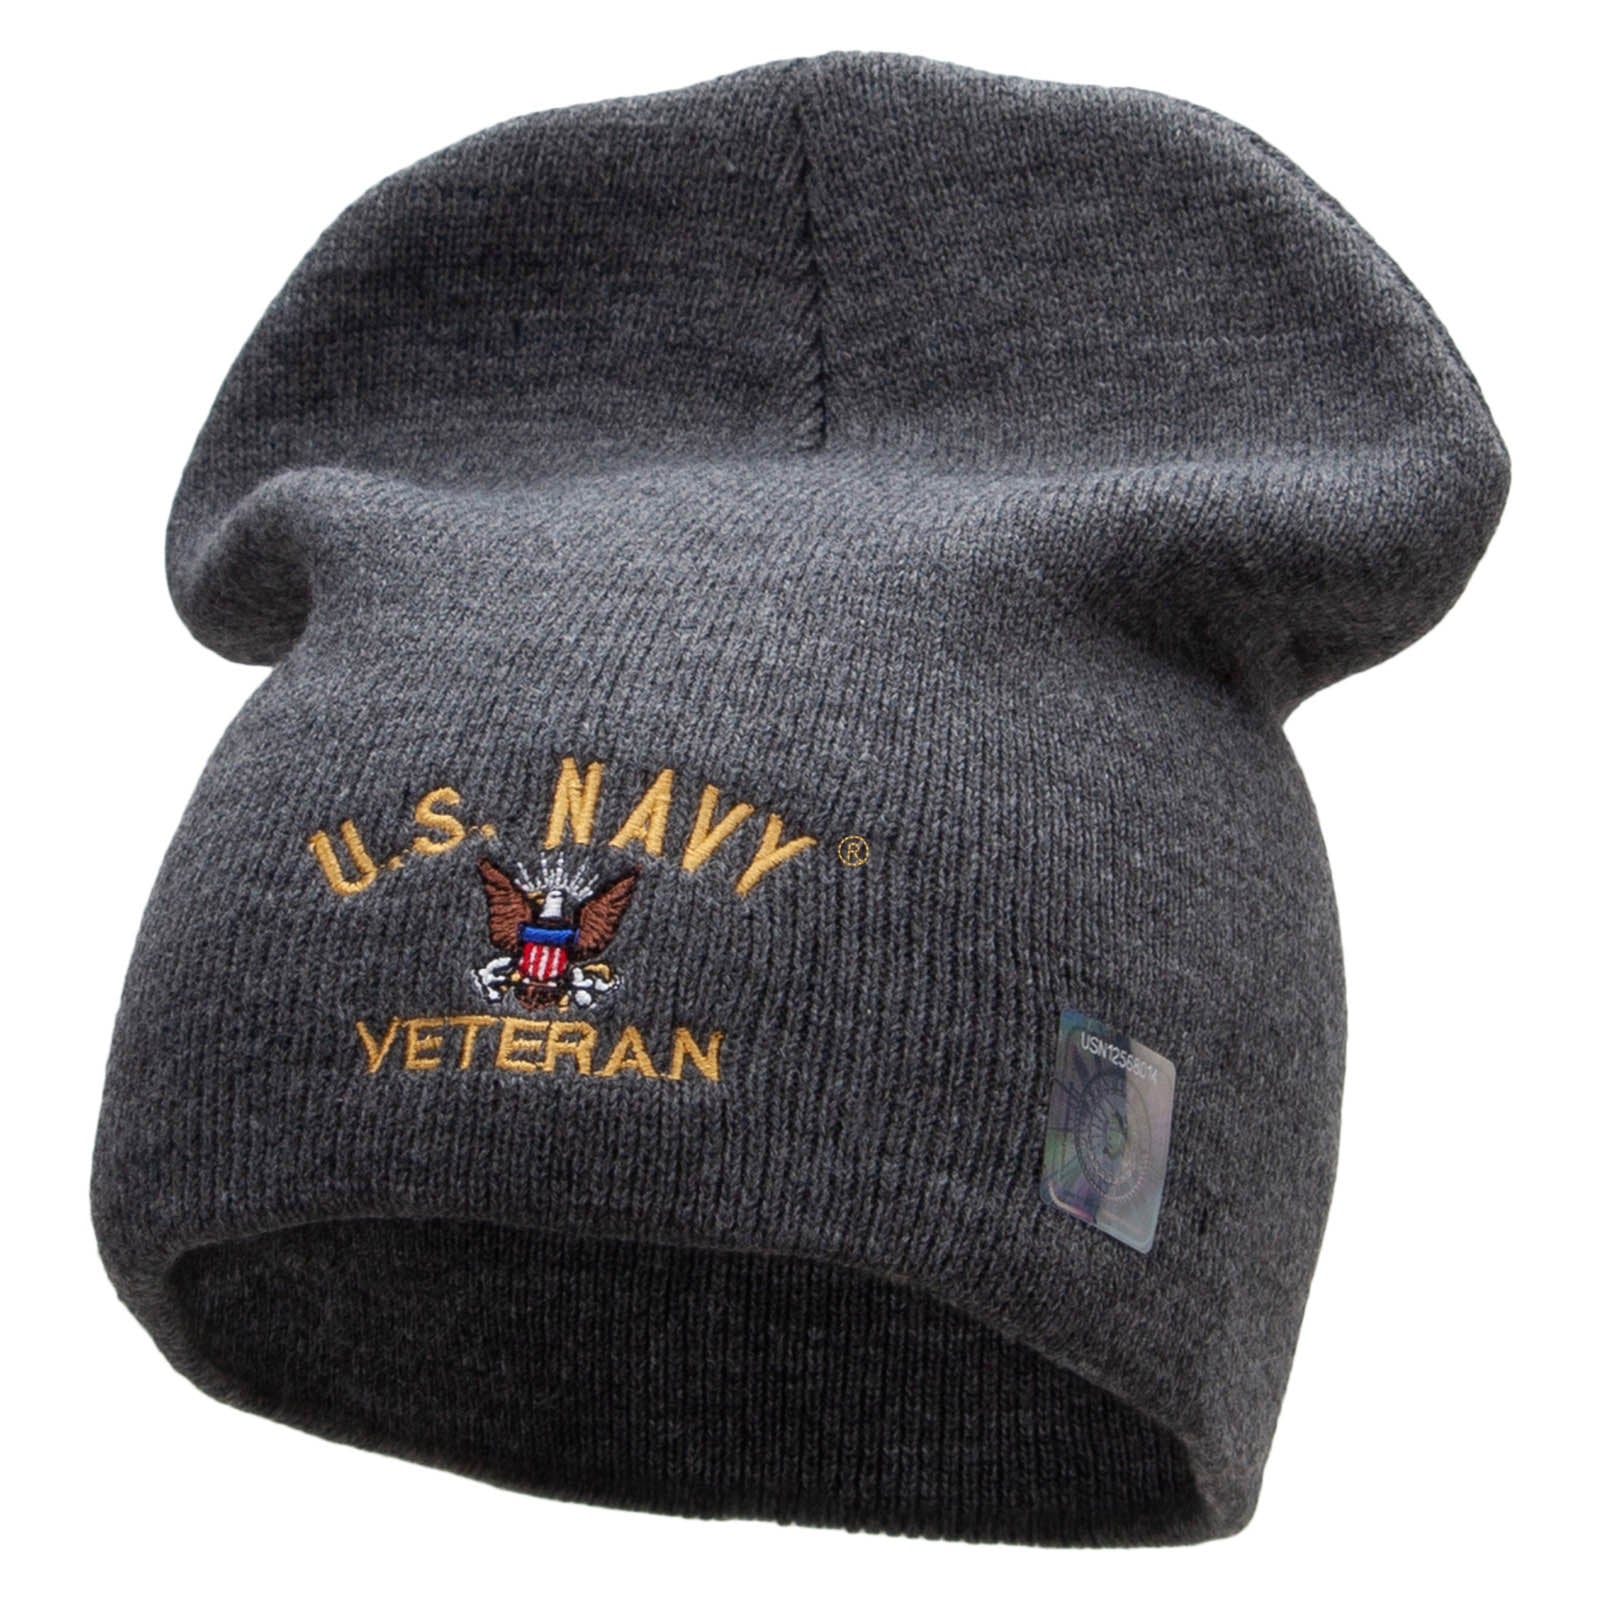 Licensed US Navy Veteran Military Embroidered Short Beanie Made in USA - Dk Grey OSFM